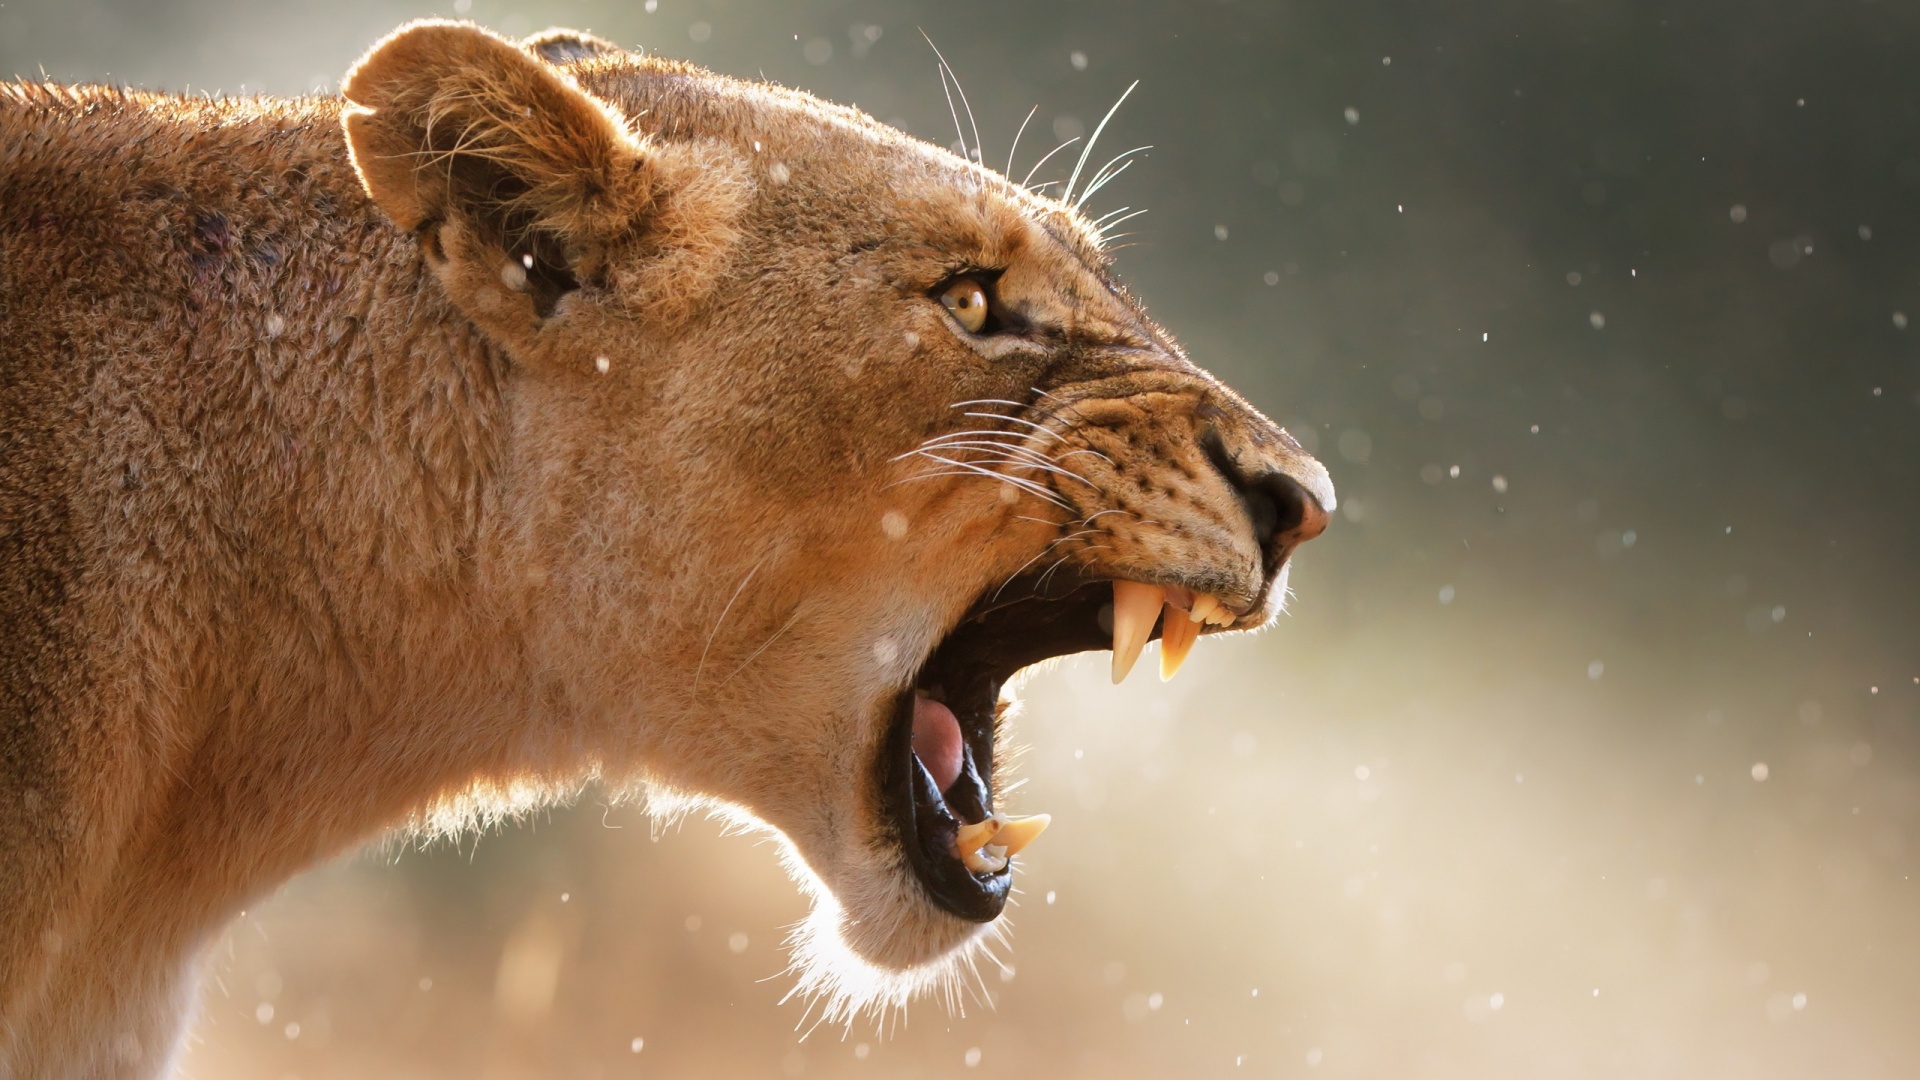 Angry Female Lion Wallpaper - Angry Female Lion - HD Wallpaper 